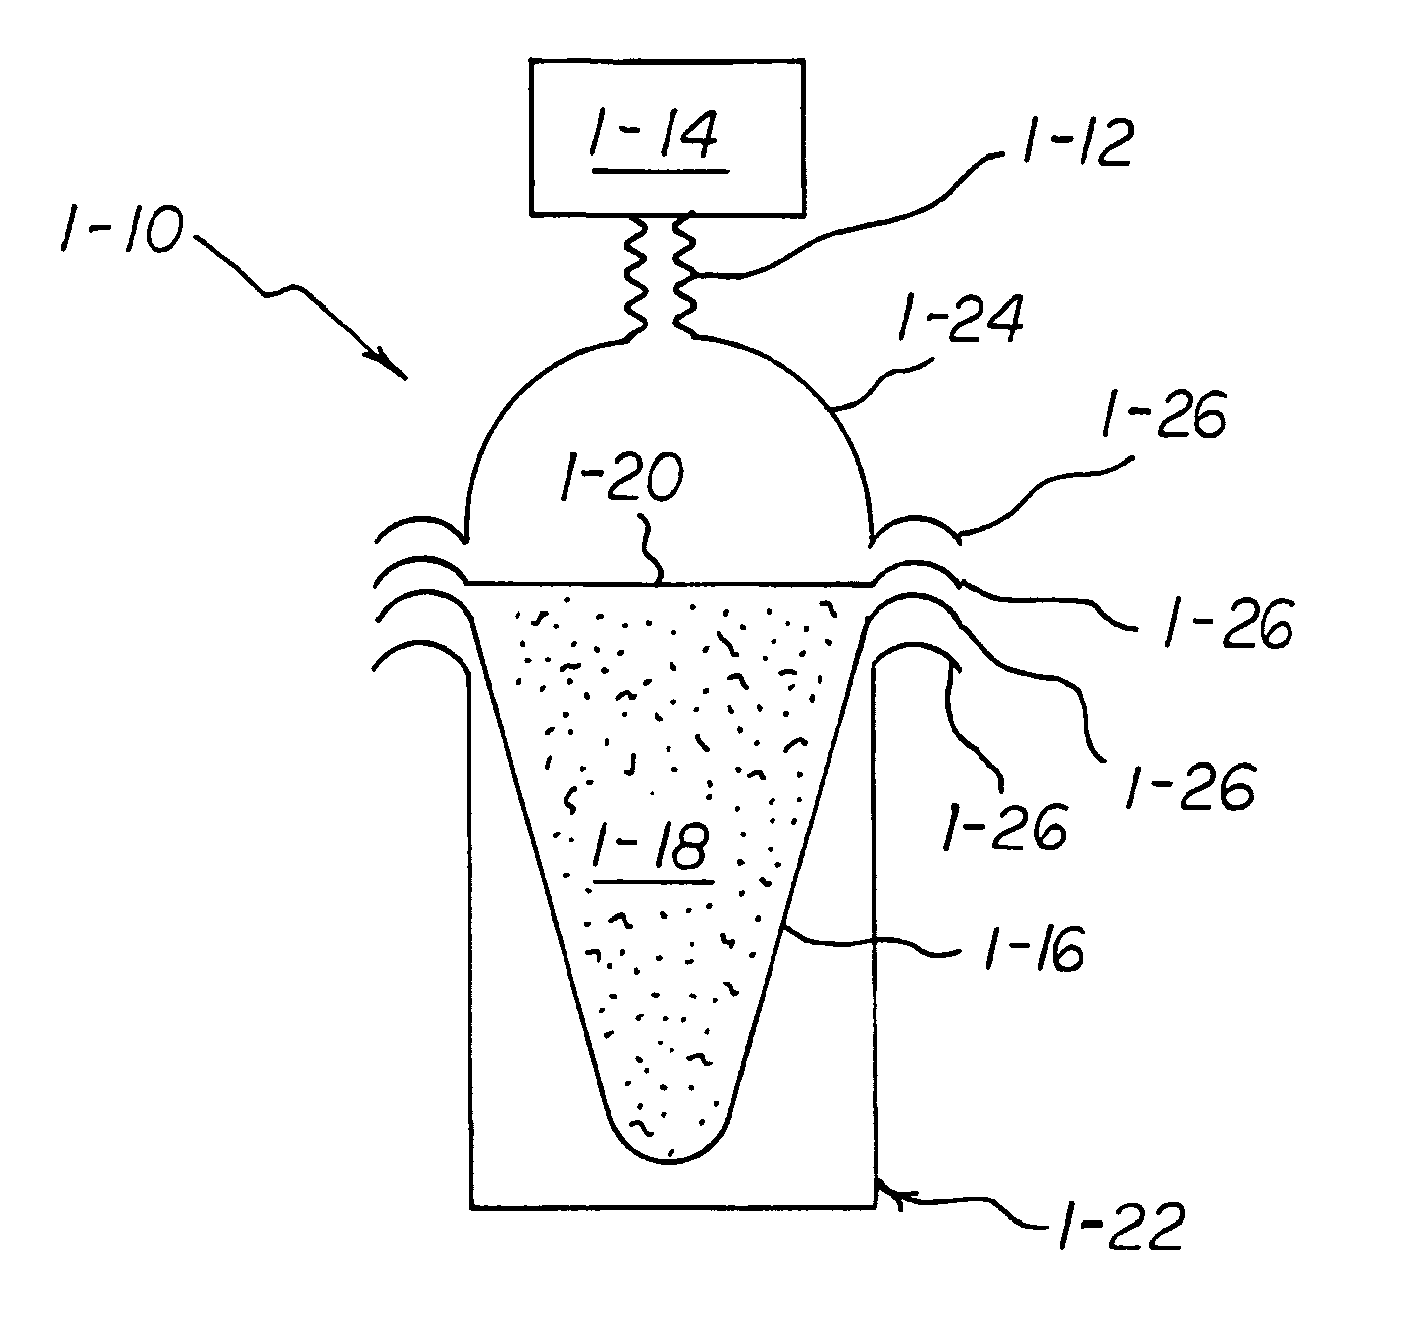 Apparatus and Method for Using Tetrazine-Based Energetic Material